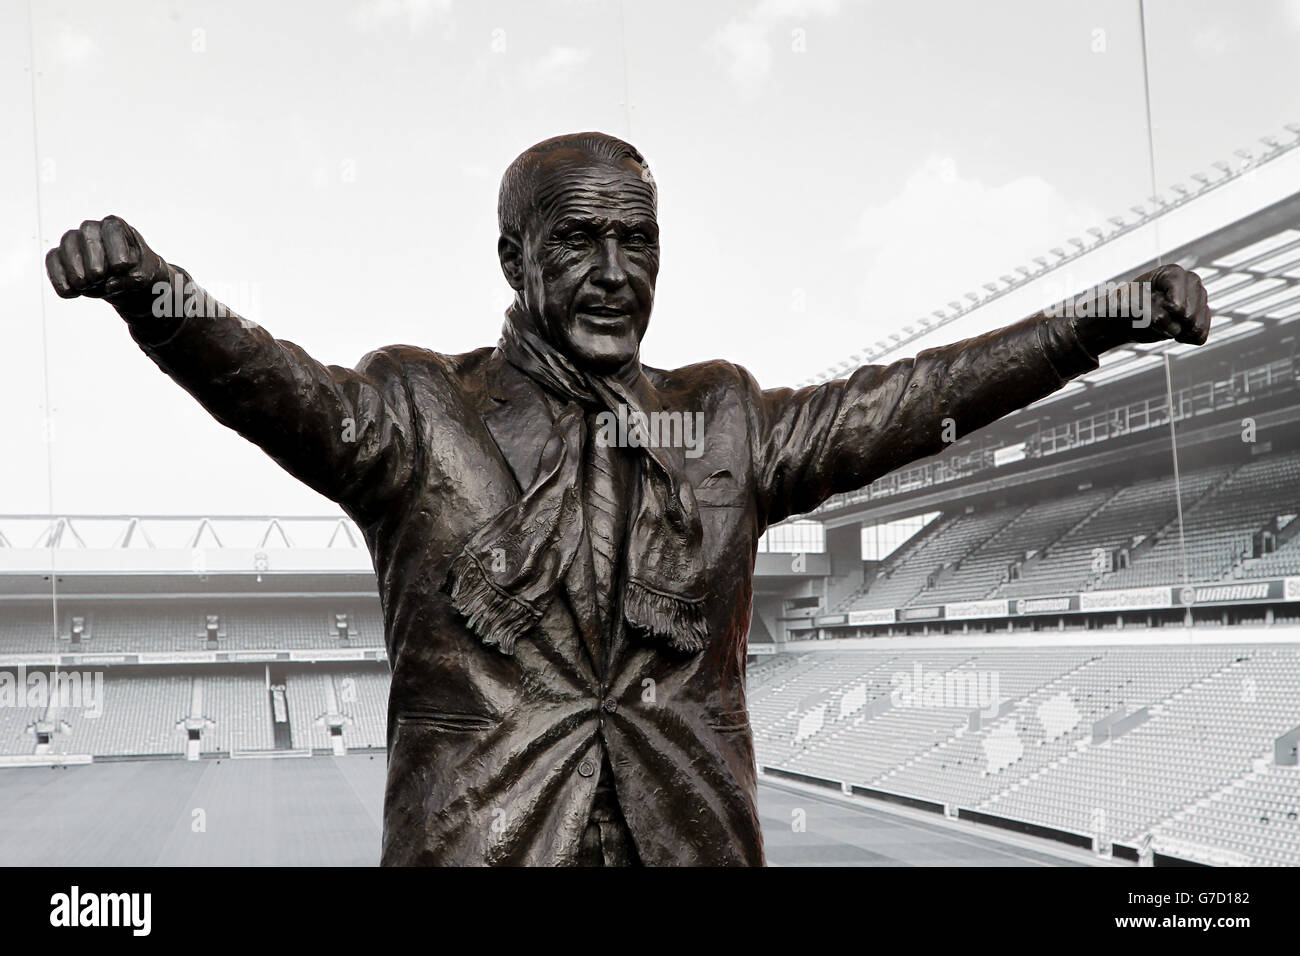 Soccer - UEFA Champions League - Group B - Liverpool v Ludogorets Razgrad - Anfield. The Bill Shankly statue outside Anfield. Stock Photo